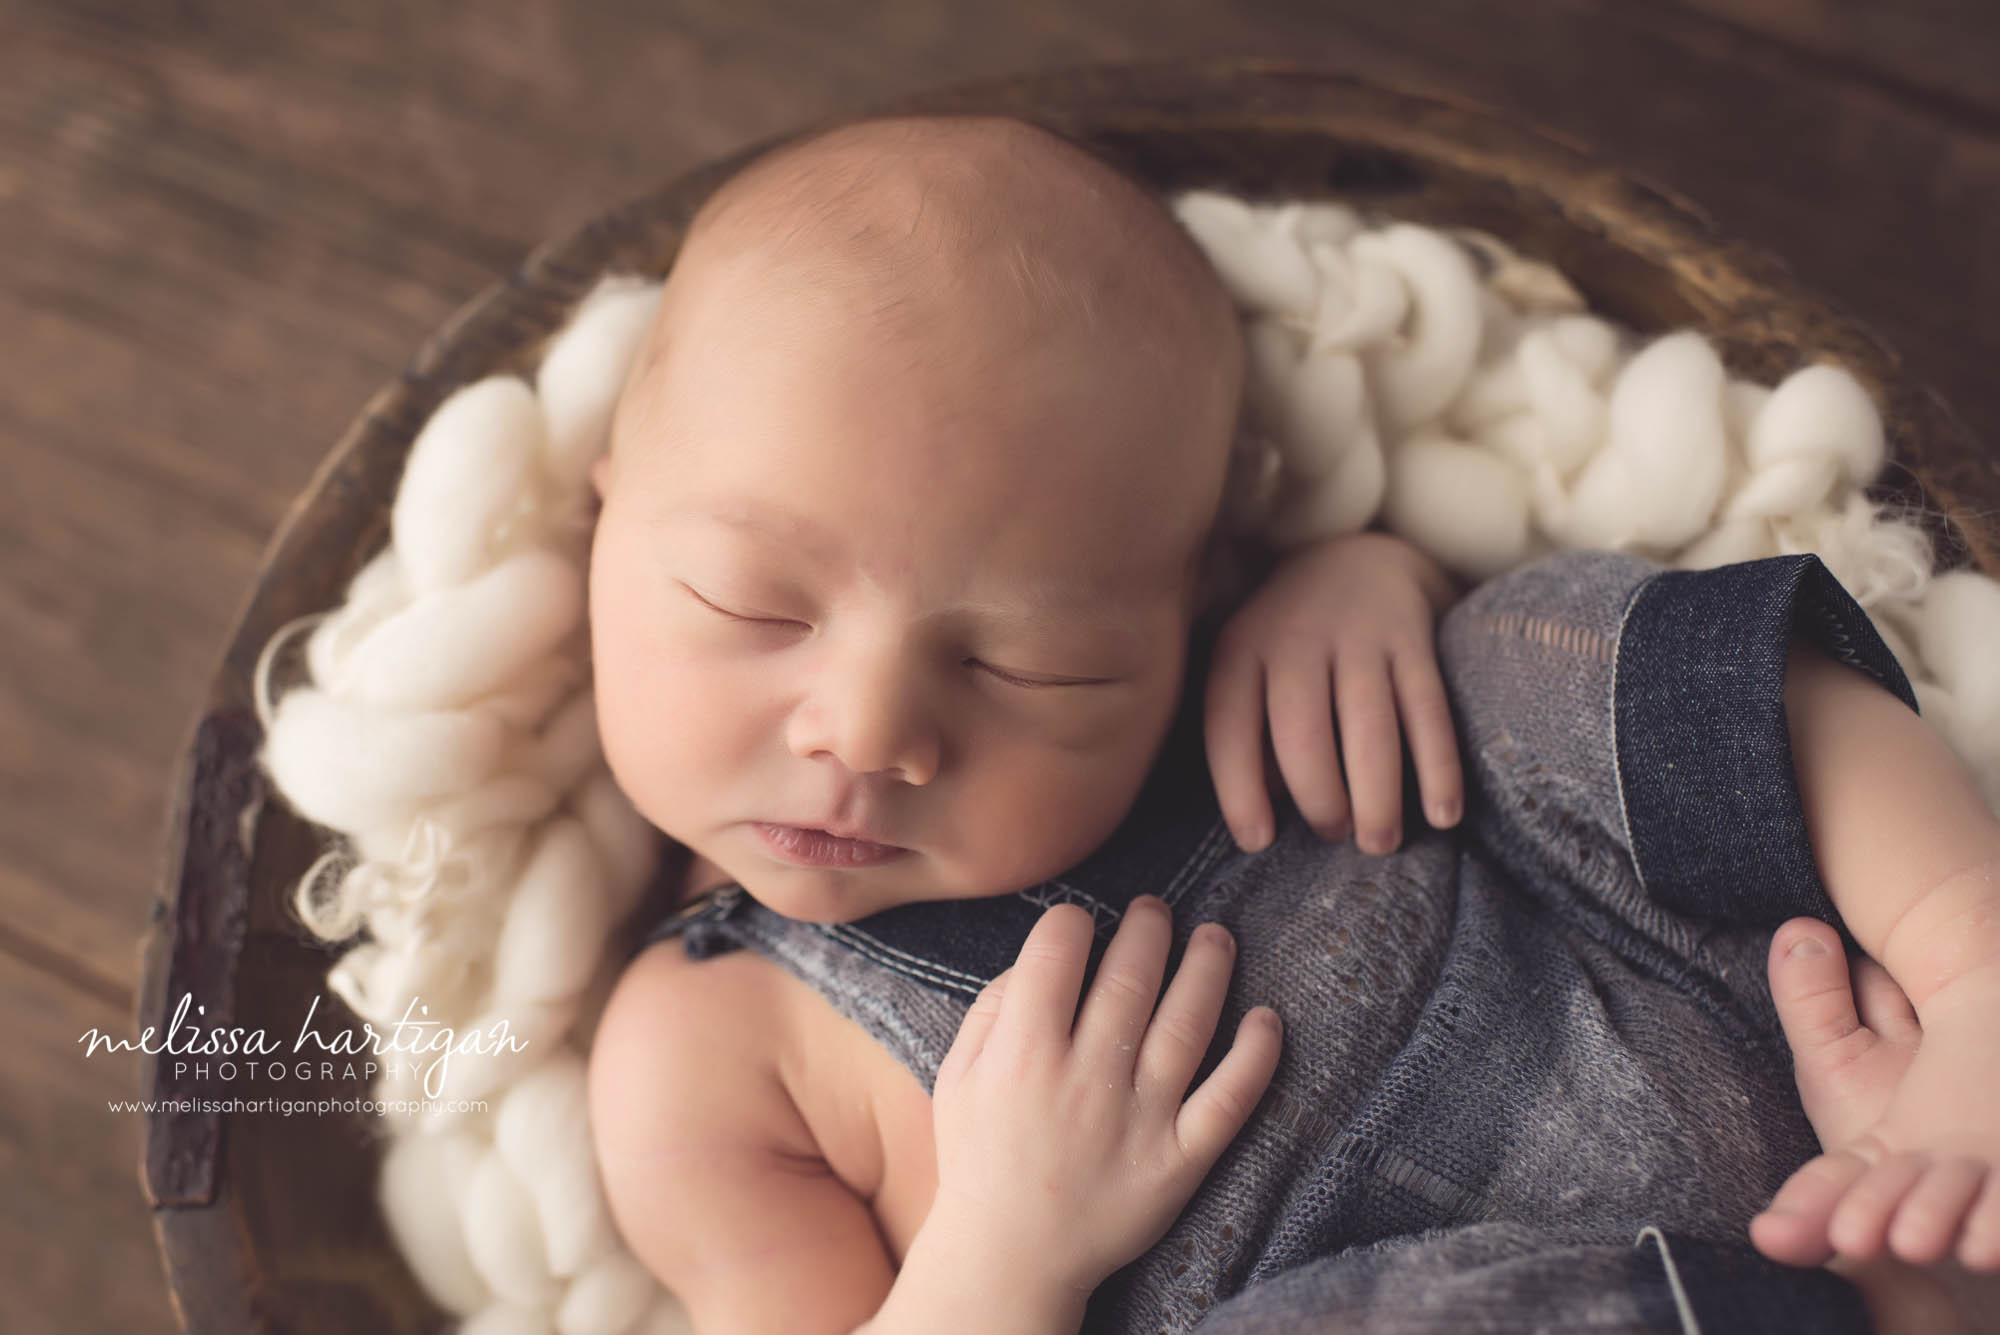 Melissa Hartigan Photography CT Newborn Photographer Braeden Newborn Session baby boy sleeping in wooden bowl with chunky knit cream blanket wearing blue knit overalls